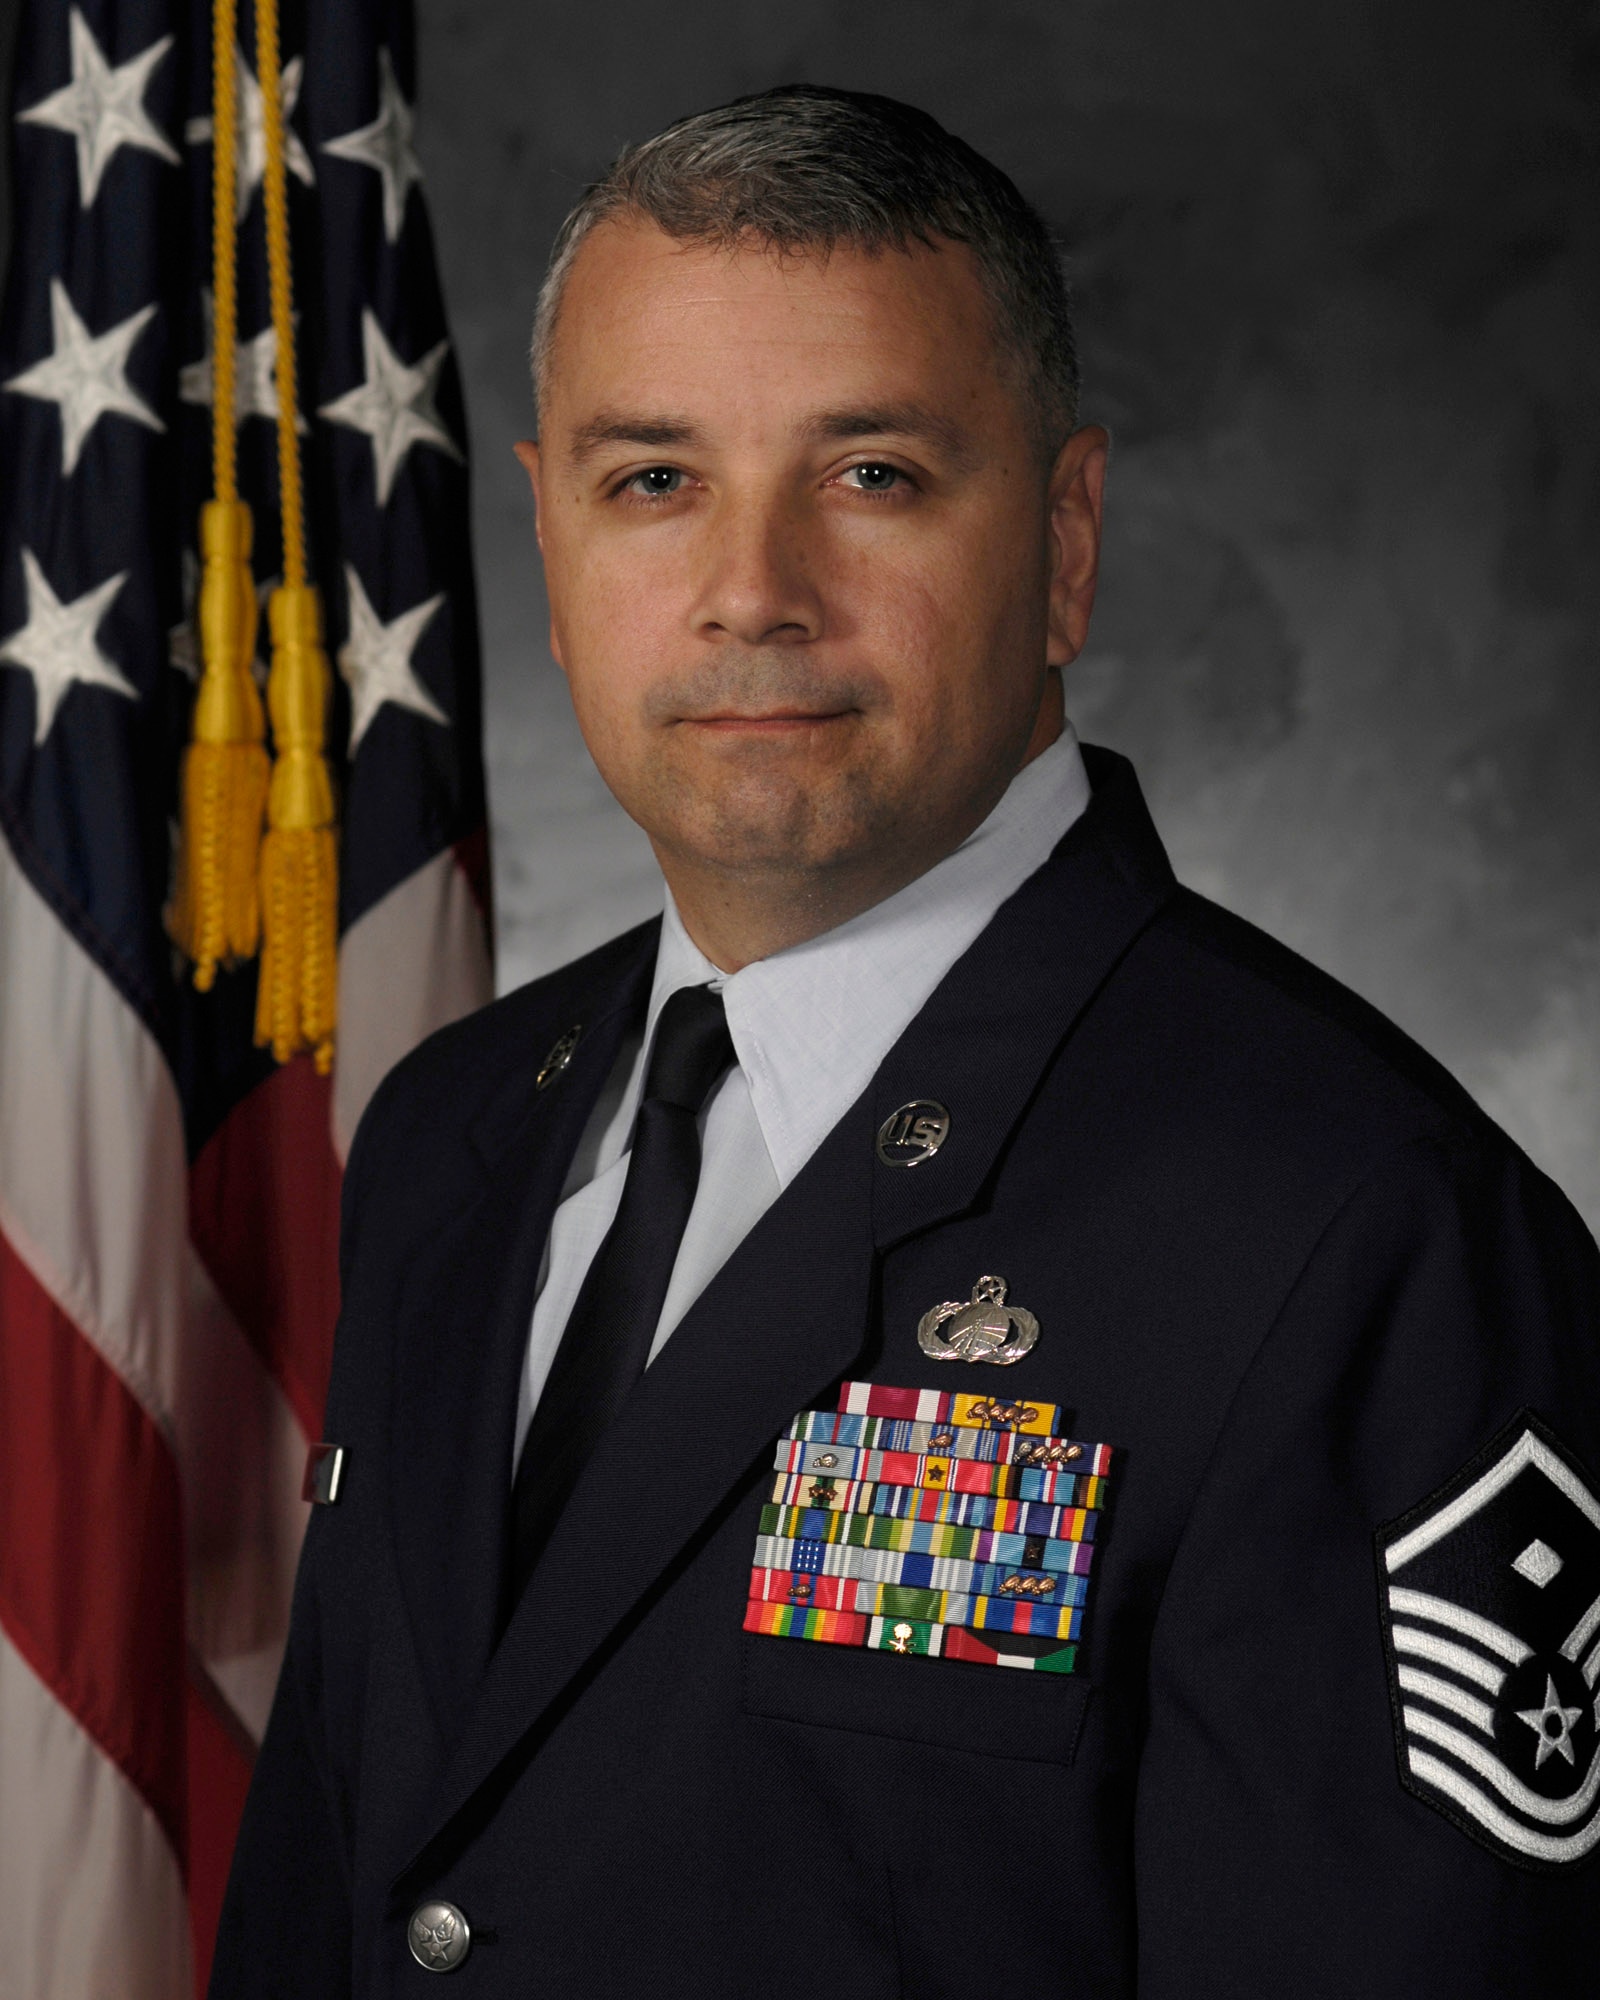 Master Sgt. Jeffrey W. Keen is the first sergeant for the 11th Logistics Readiness Squadron. Sergeant Keen led the commander’s support staff consolidation, merging three billets with no service loss. He also quarterbacked 16 non-judicial punishment cases, instructing both supervisors and the commander on the process. He also sets the standard, conducting a robust physical training program, weekly dorm visits and open ranks inspections. He deployed to Eagle Flag and executed beddown for 288 airmen. He has earned his second Community College of the Air Force degree in human resource management. (U.S. Air Force photo by Senior Airman Sean Adams)